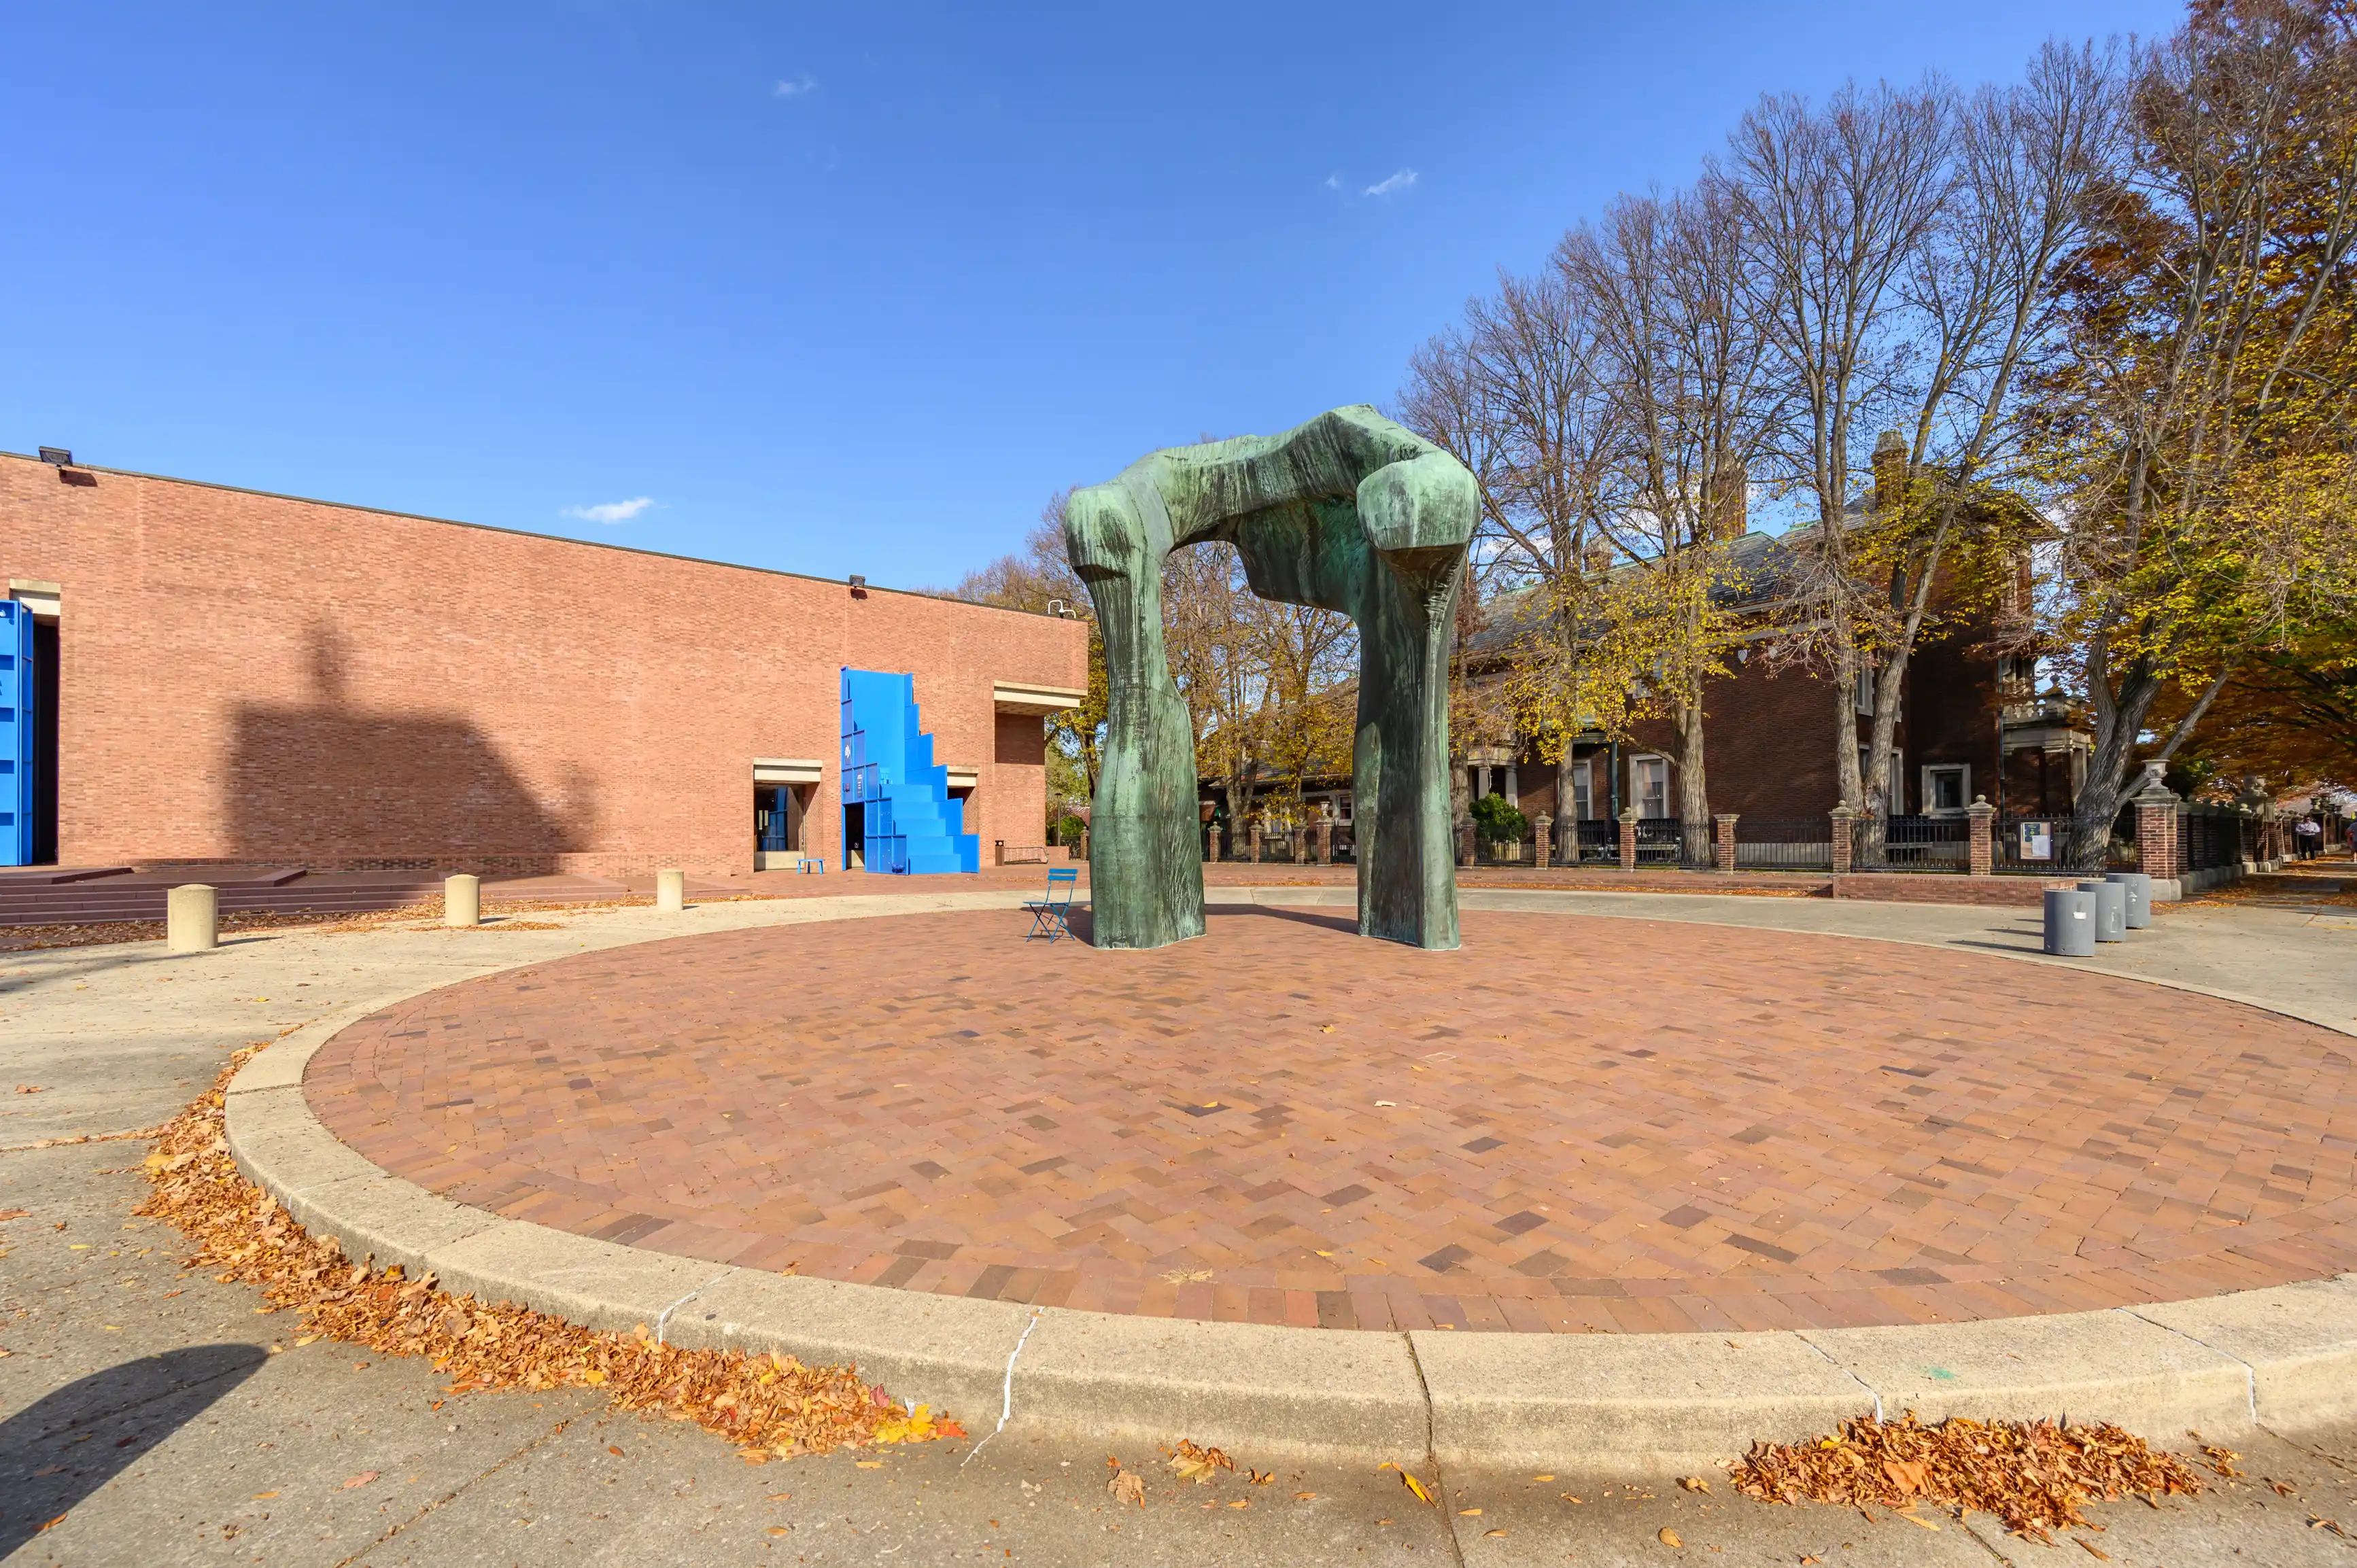 Large bronze sculpture in a public plaza with brick pavement, surrounded by trees and a building with bright blue elements in the background.